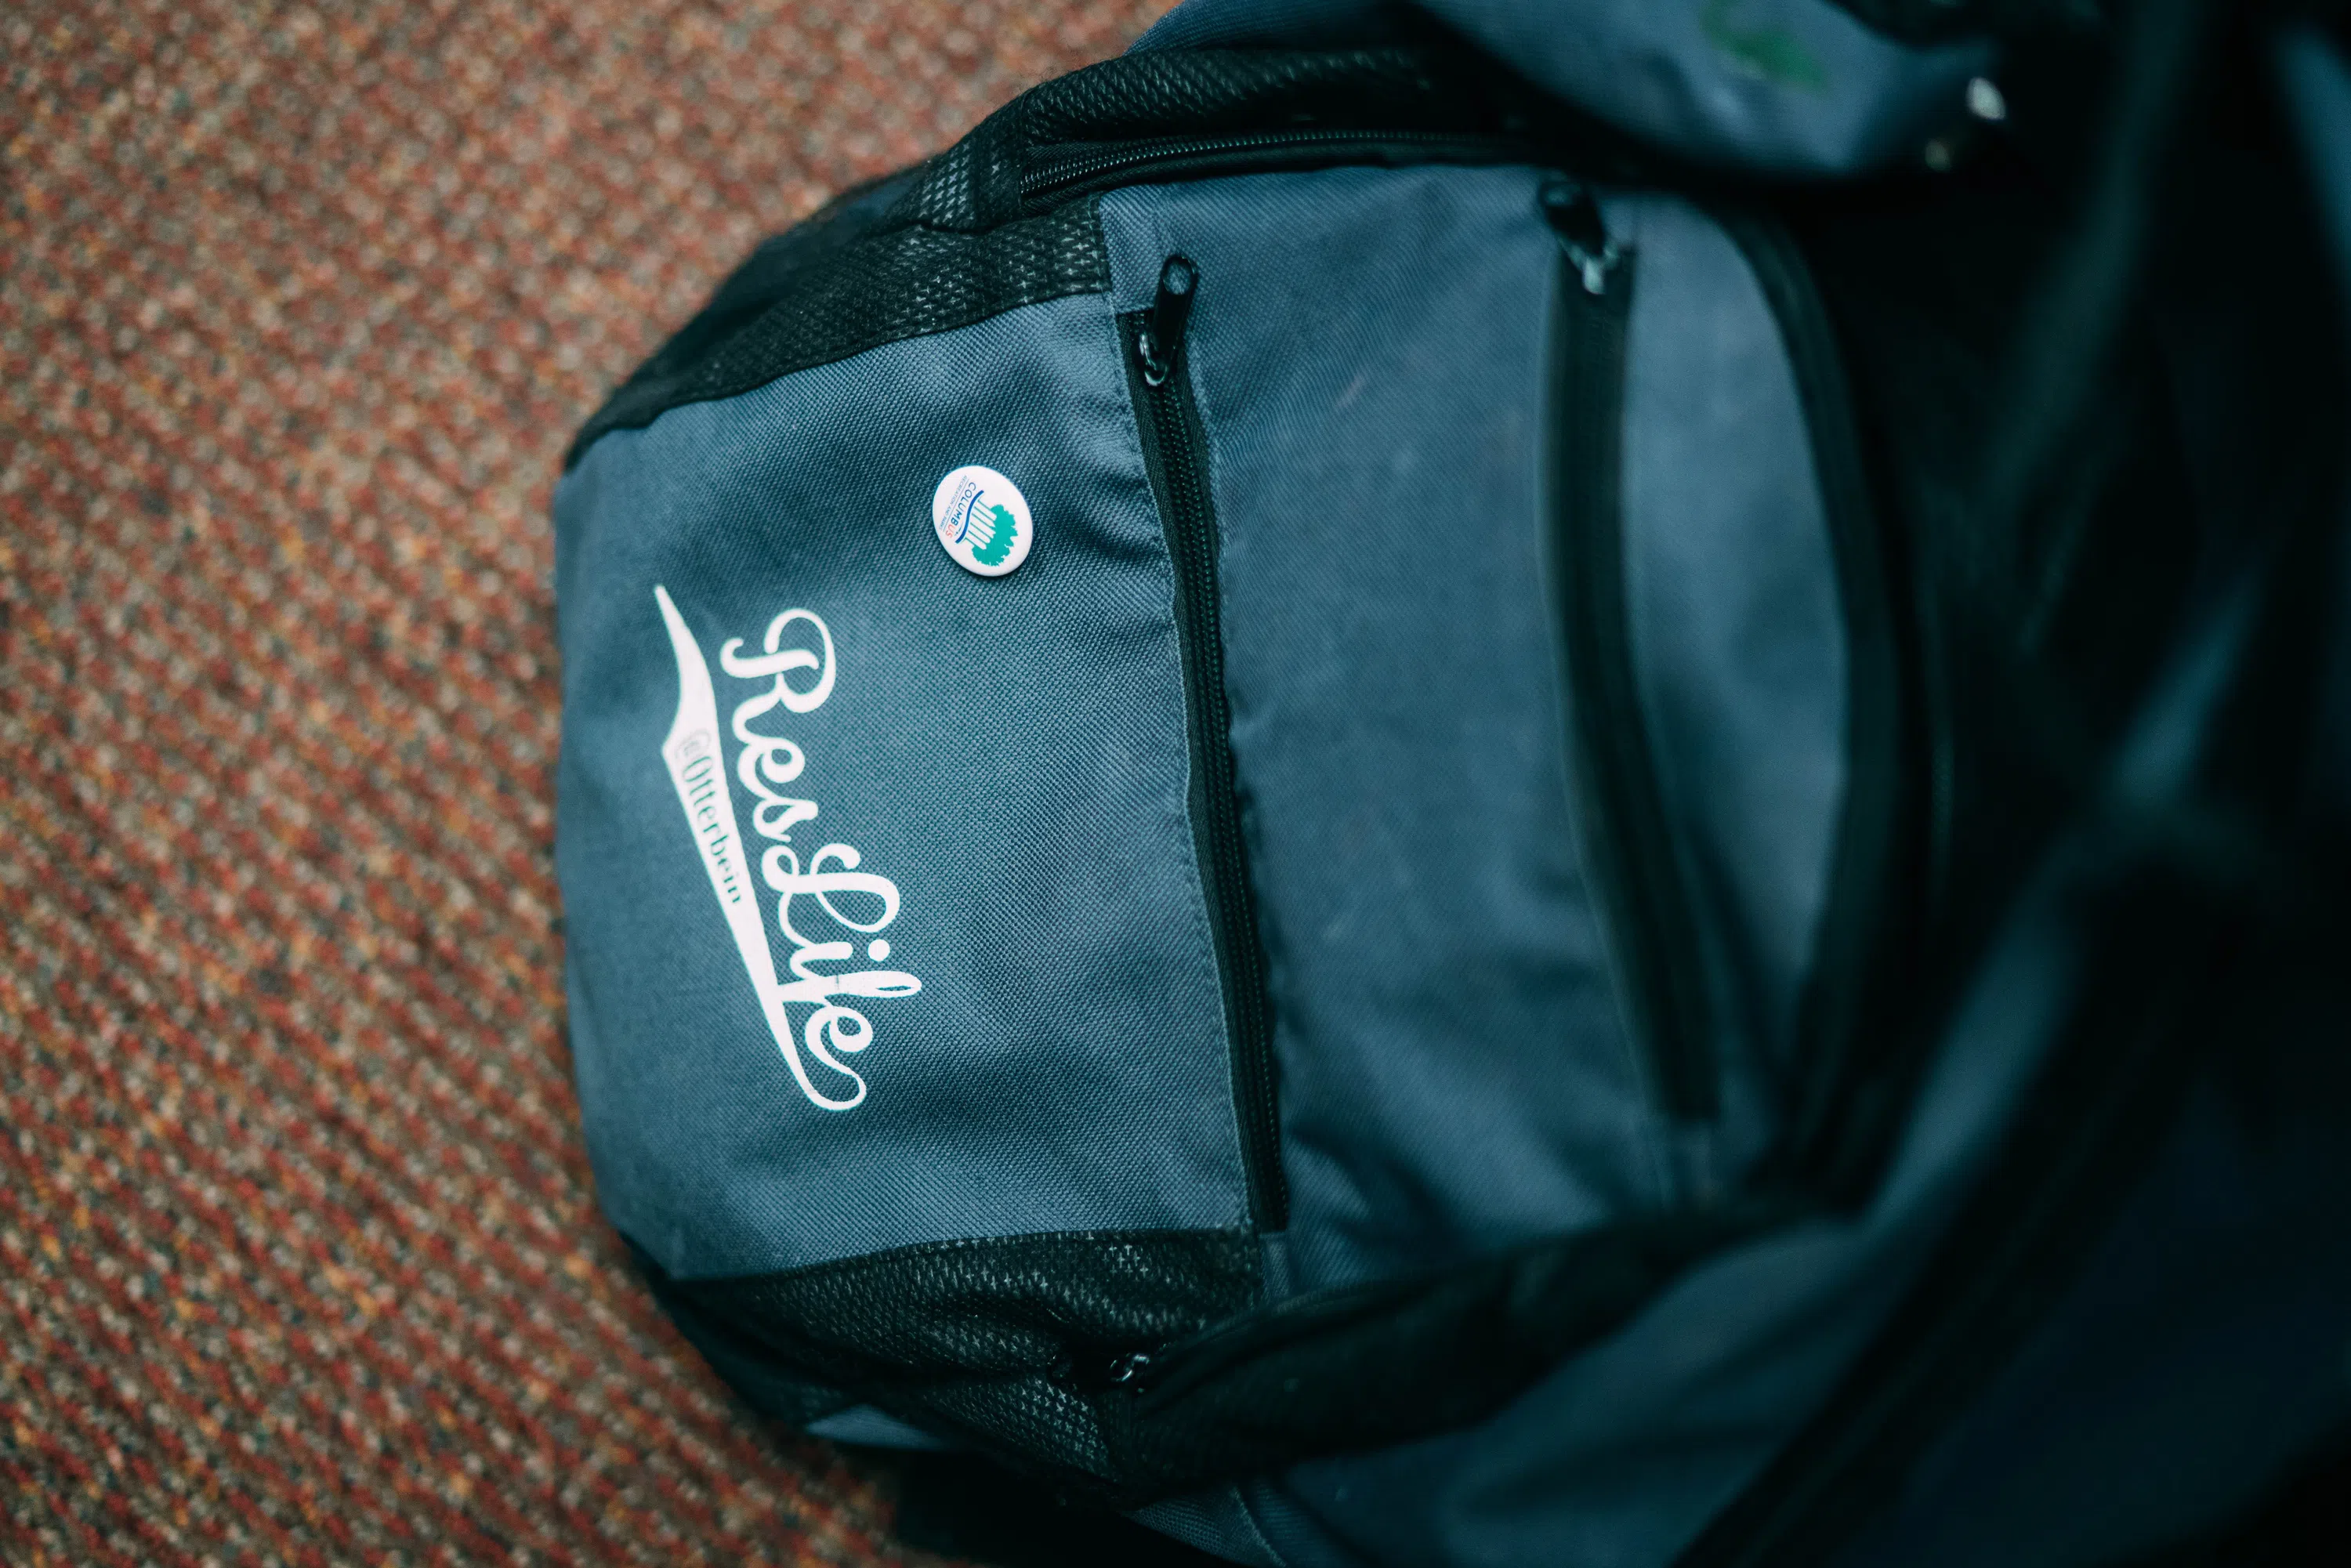 A blue backpack with "ResLife" embroidered on it.